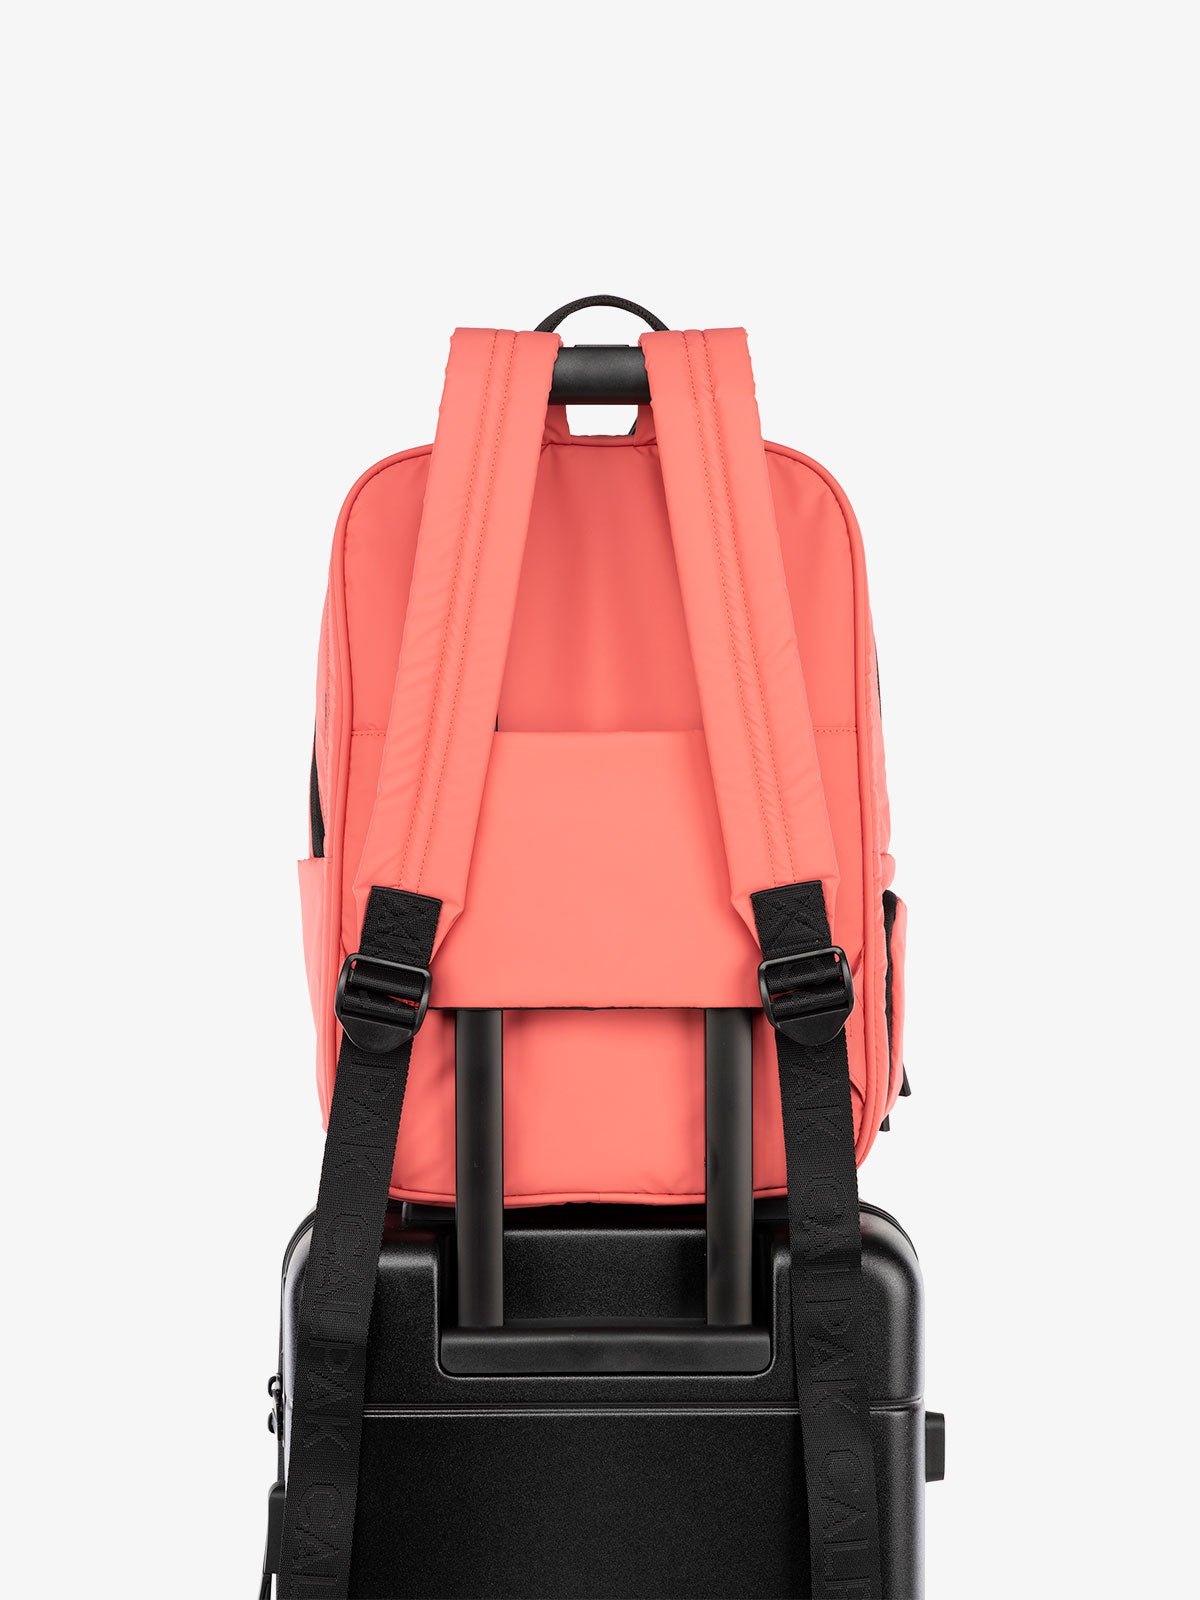 CALPAK water resistant Luka Laptop Backpack with adjustable shoulder straps and trolley sleeve in watermelon